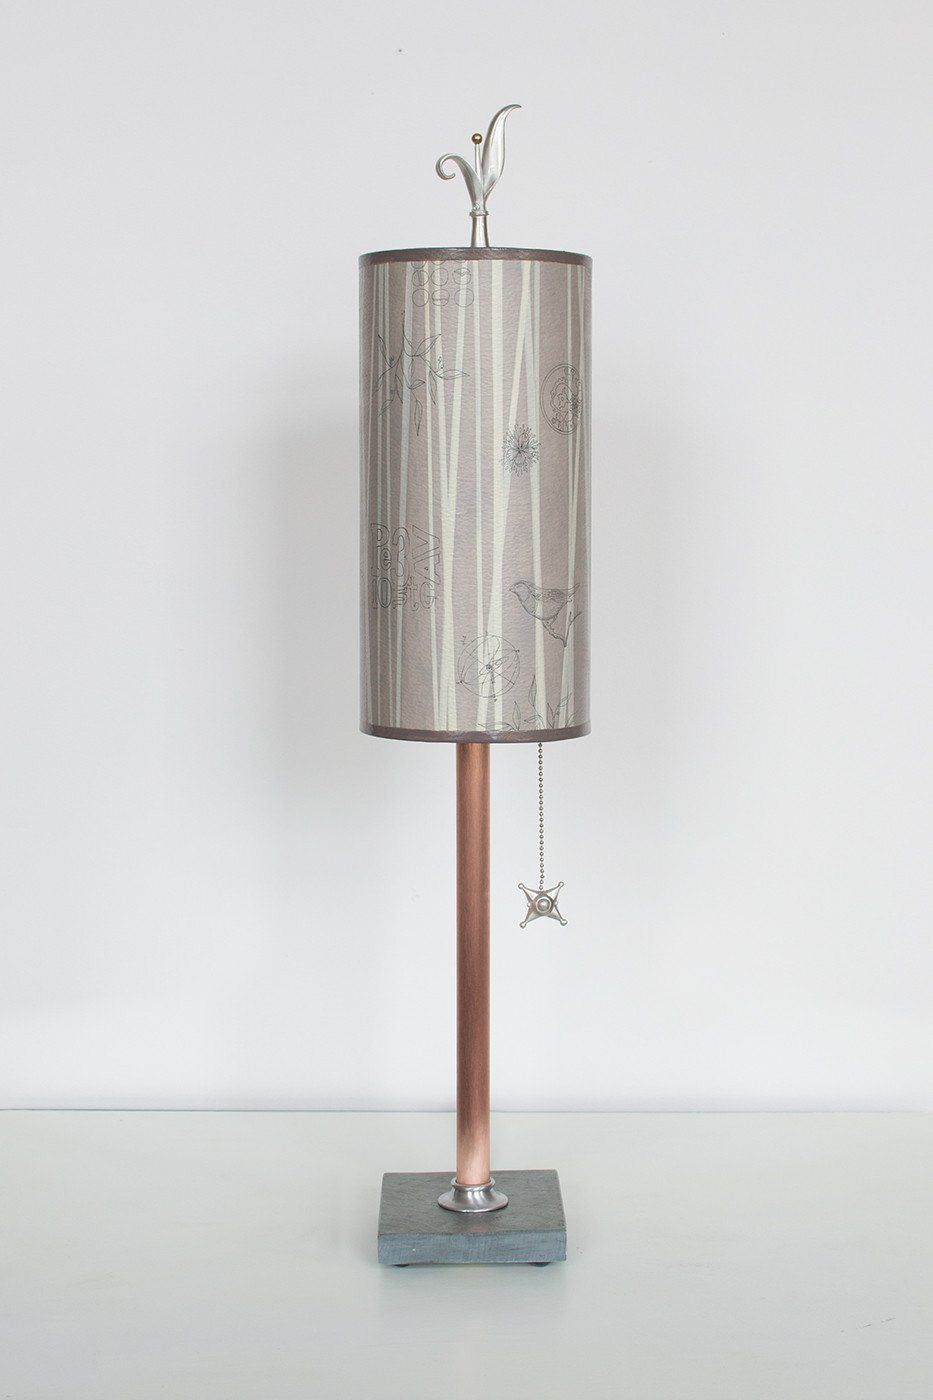 Janna Ugone & Co Table Lamps Copper Table Lamp with Small Tube Shade in Birch Lines